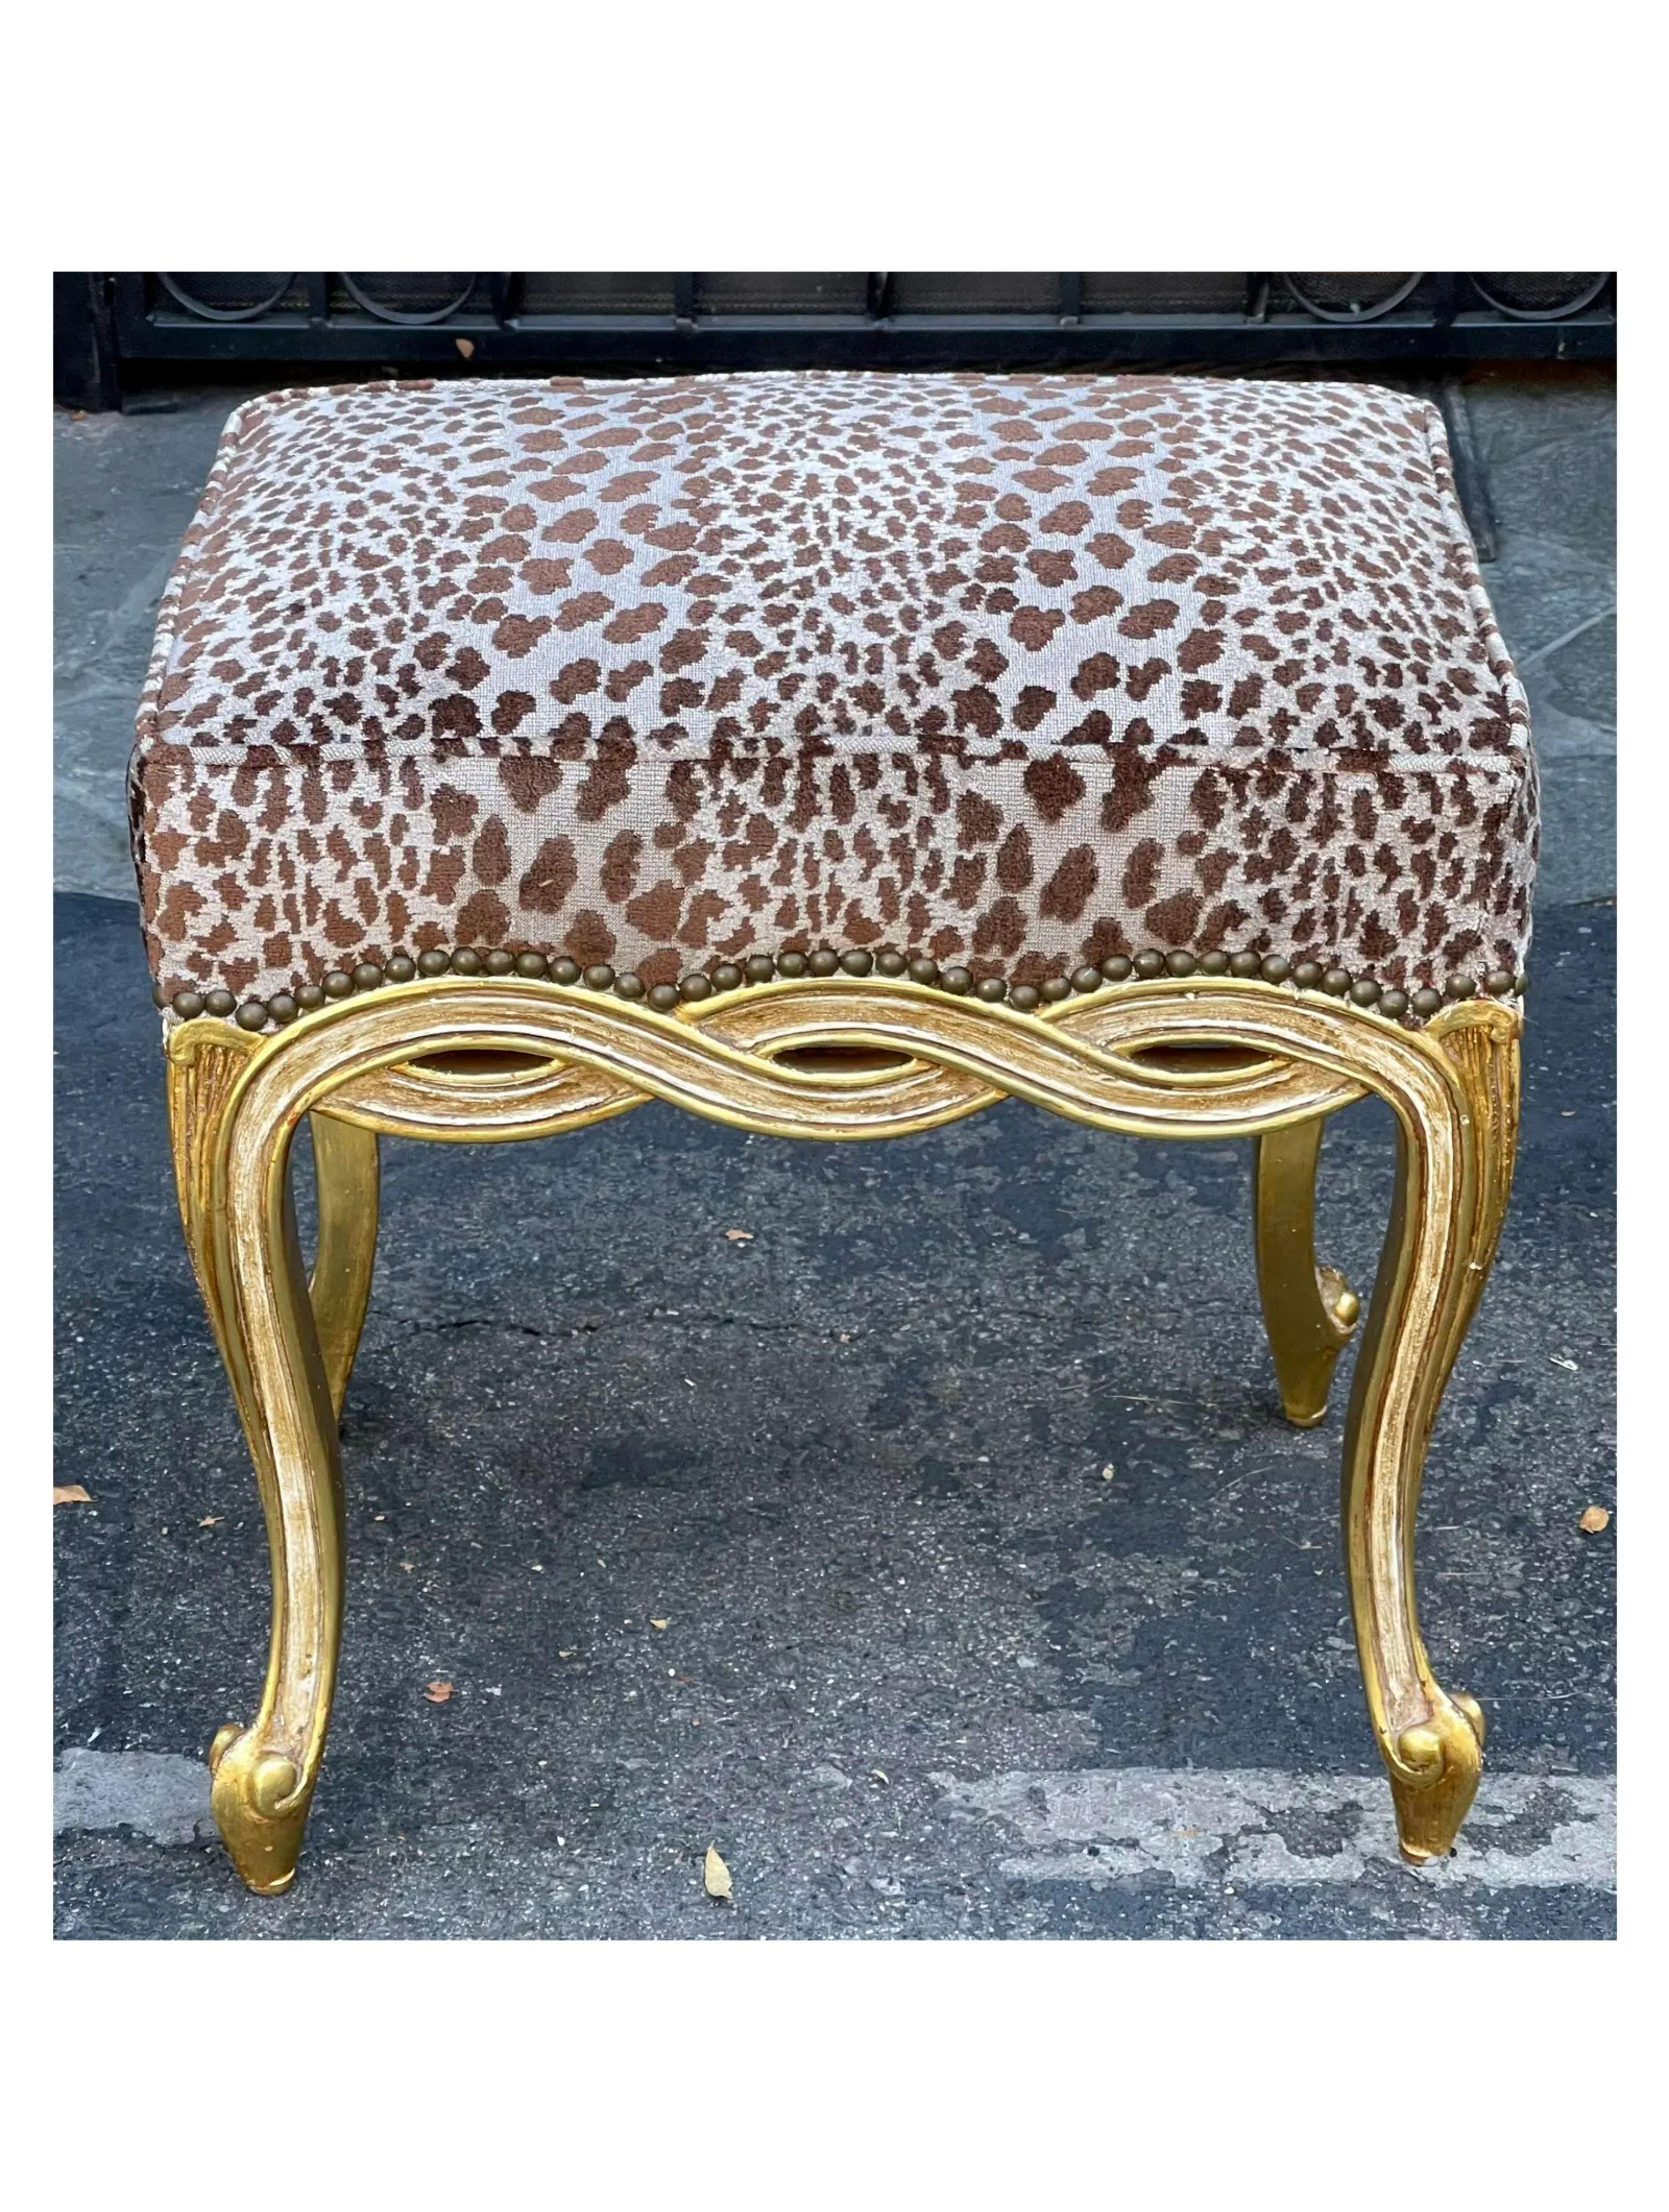 Contemporary Regency Style Designer Taboret Bench with Cheetah Velvet by Randy Esada For Sale